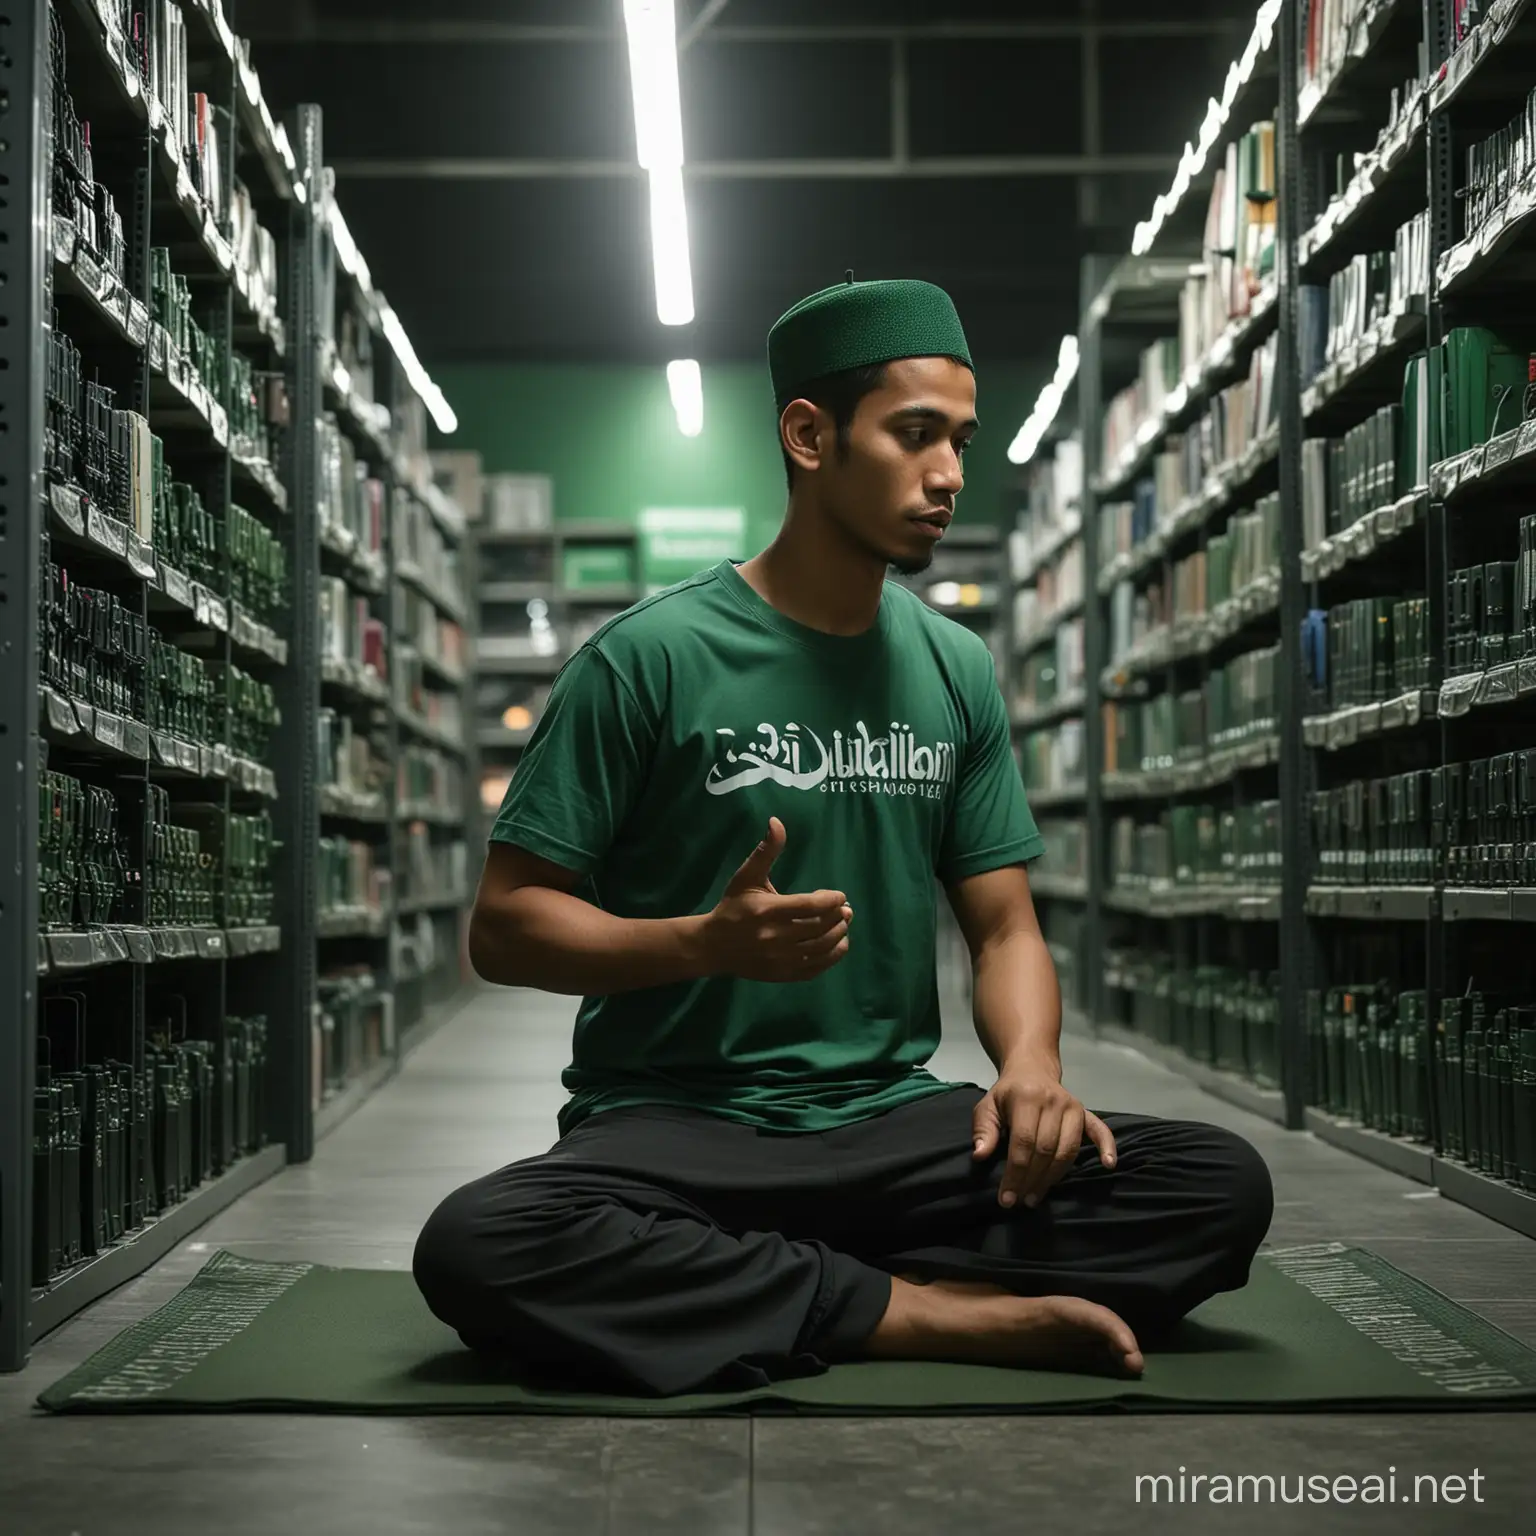 Very realistic, a Muslim Malay worker is sitting praying on the mat. Wearing a dark green t-shirt. the background is filled with computers arranged on shelves. computer shop. there is a dark green light behind. canon eos-id x mark iii dslr --v 6.0